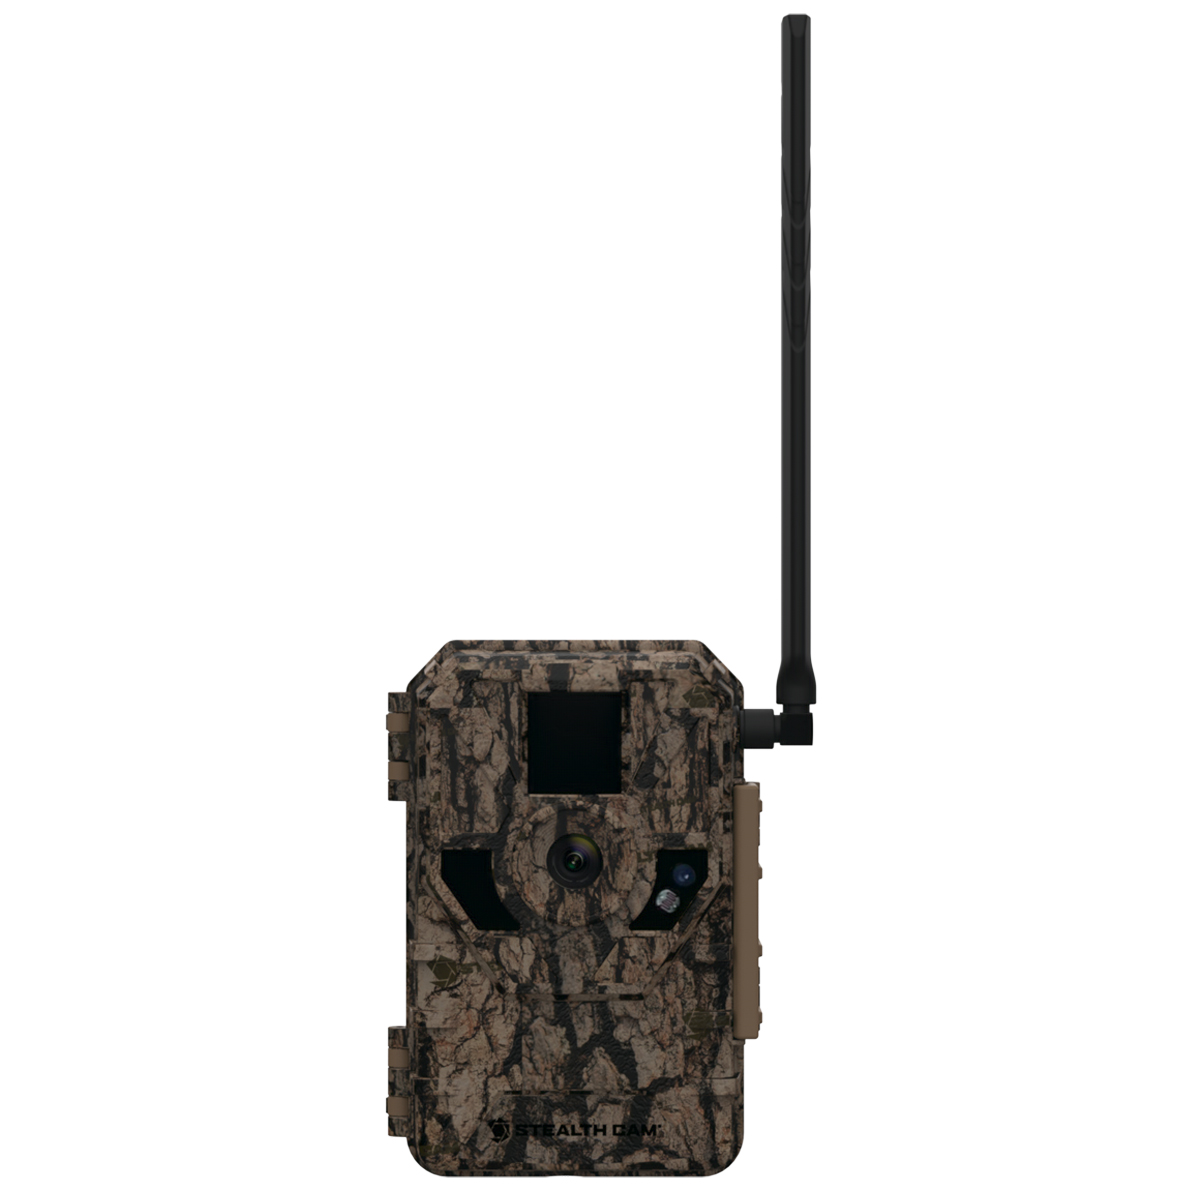 STEALTH CAM SKOUT 16MP WIRELESS TRAIL CAMERA - NEW main photo.